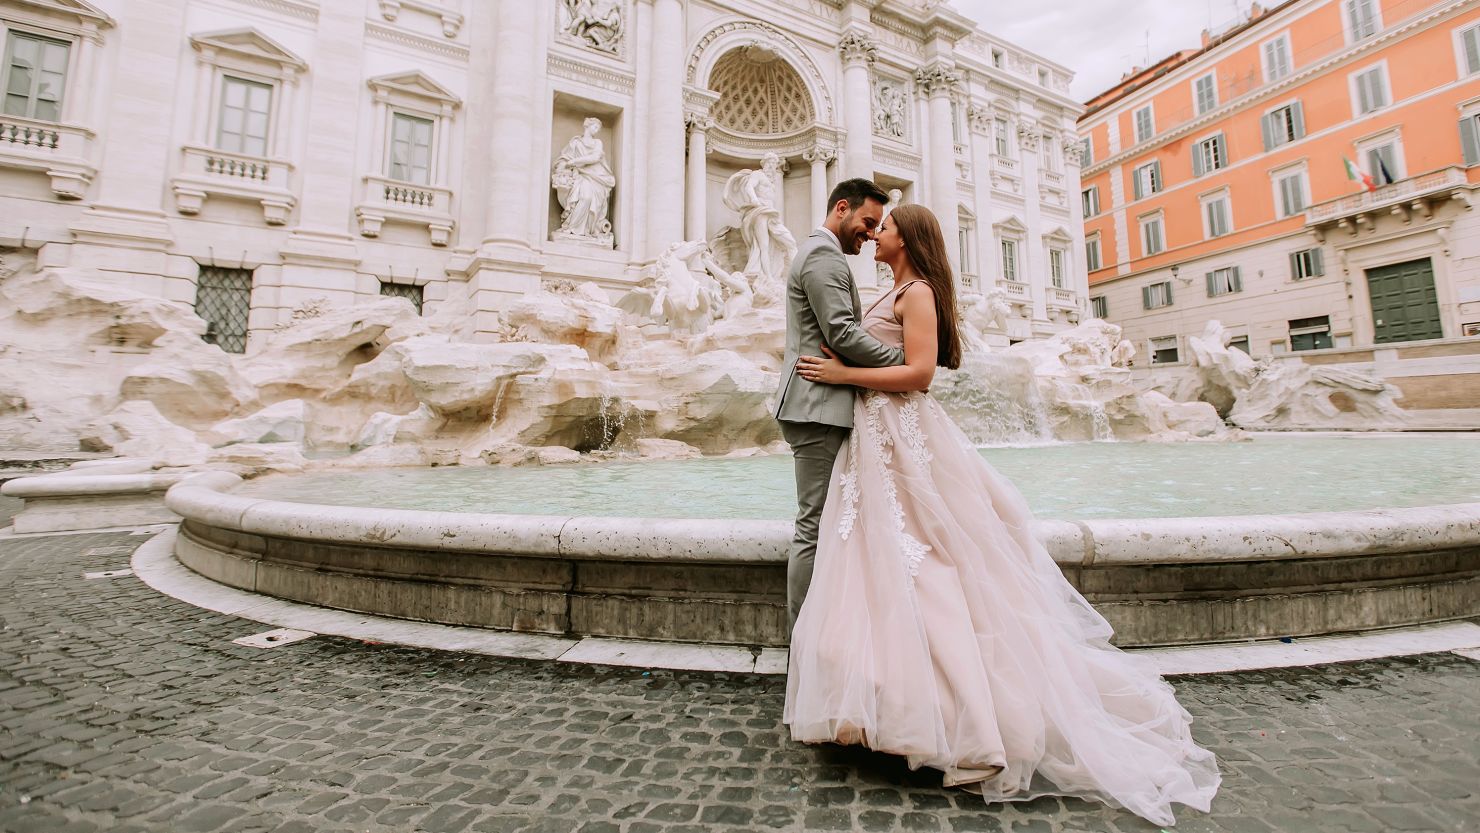 Lazio will pay couples $2,200 of expenses if they marry in the region -- and that includes in Rome.